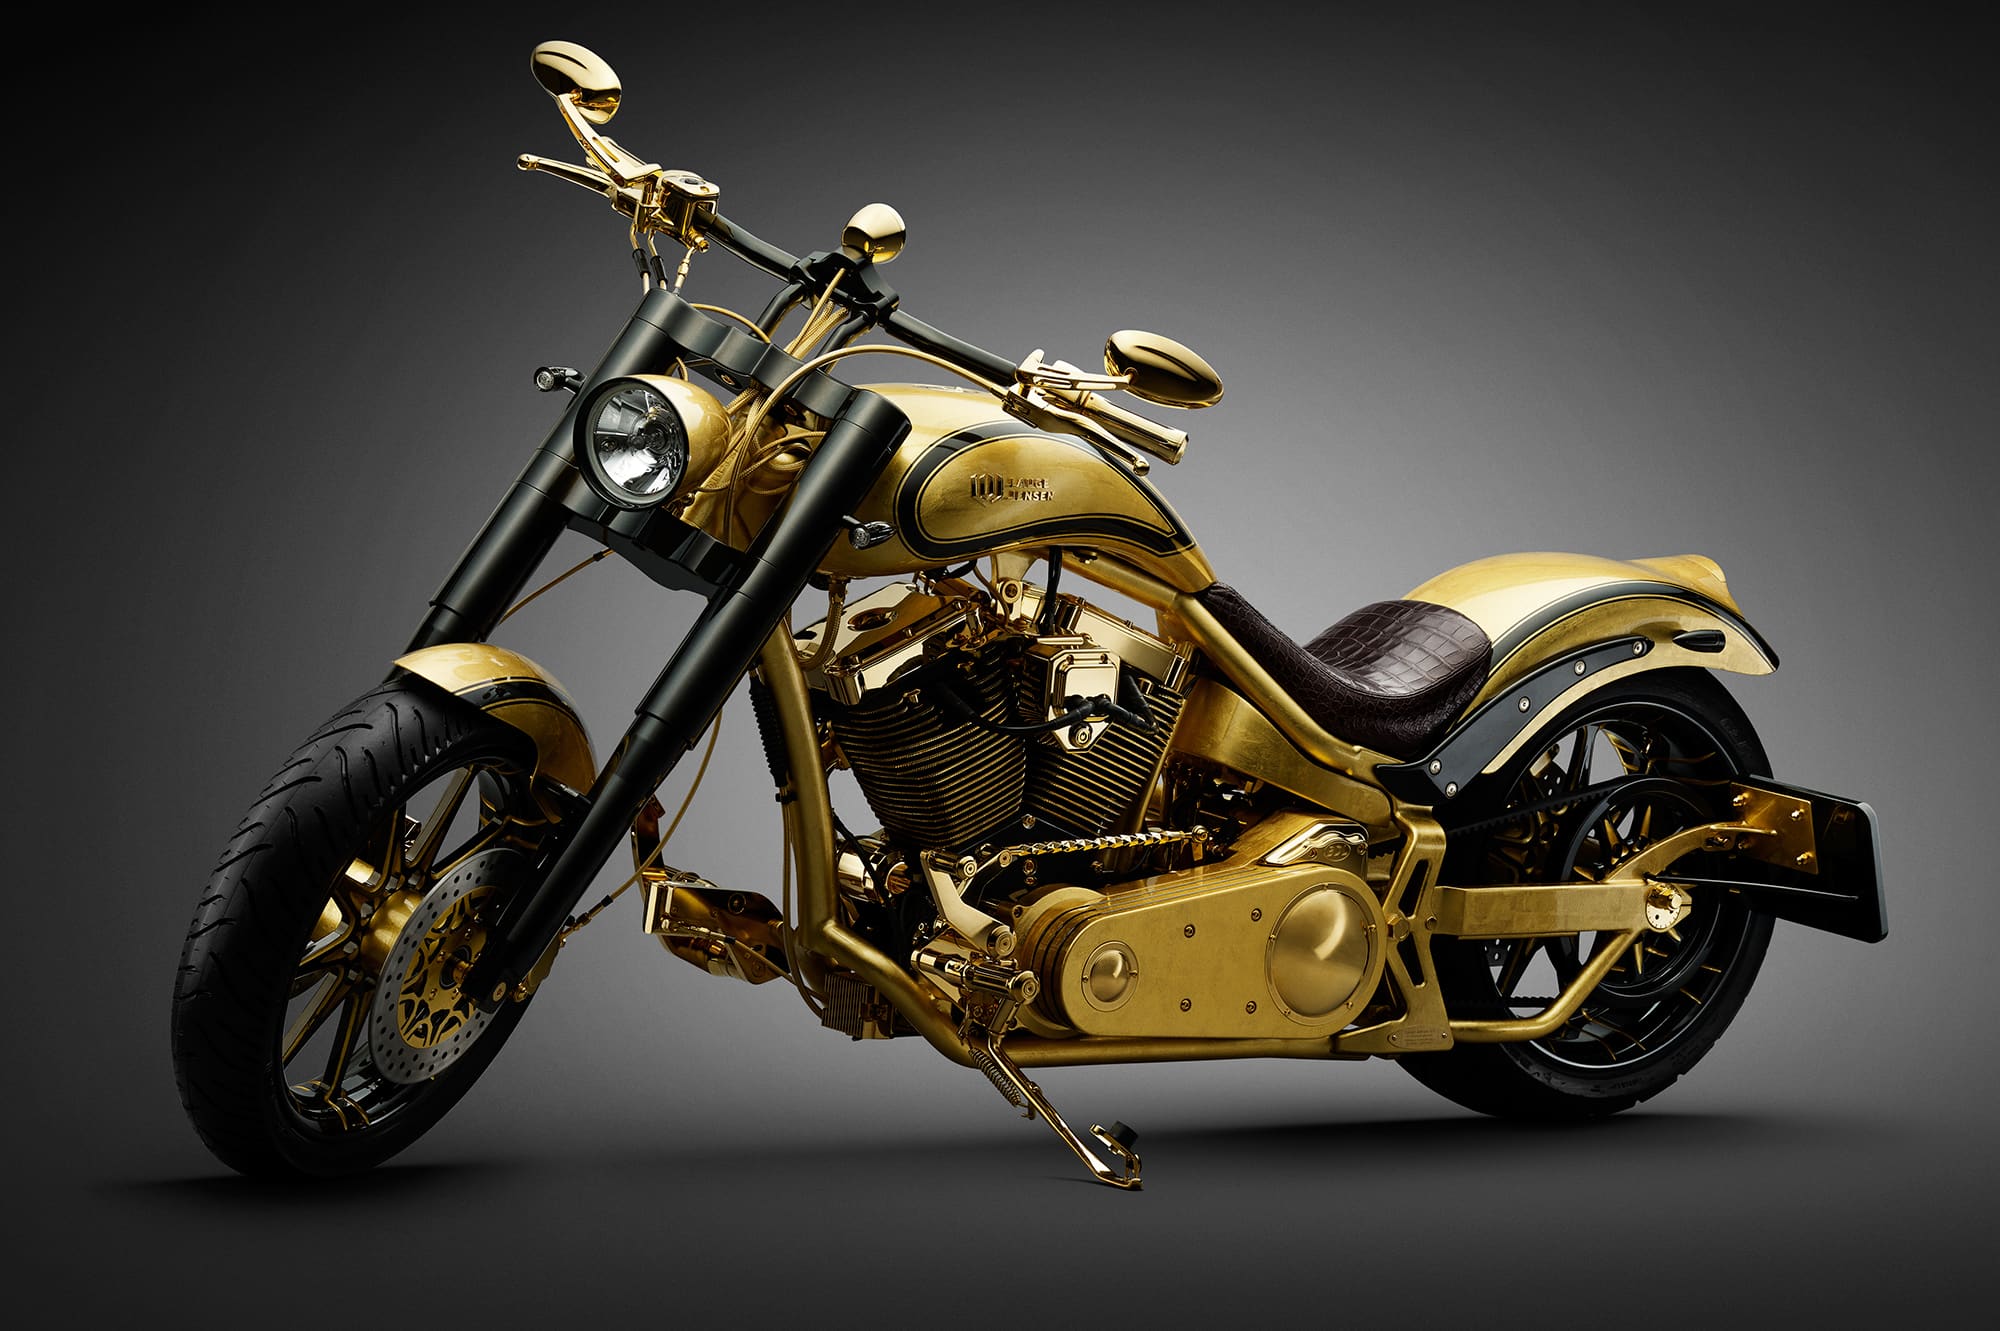 Million-dollar motorcycle coming soon from Lauge Jensen